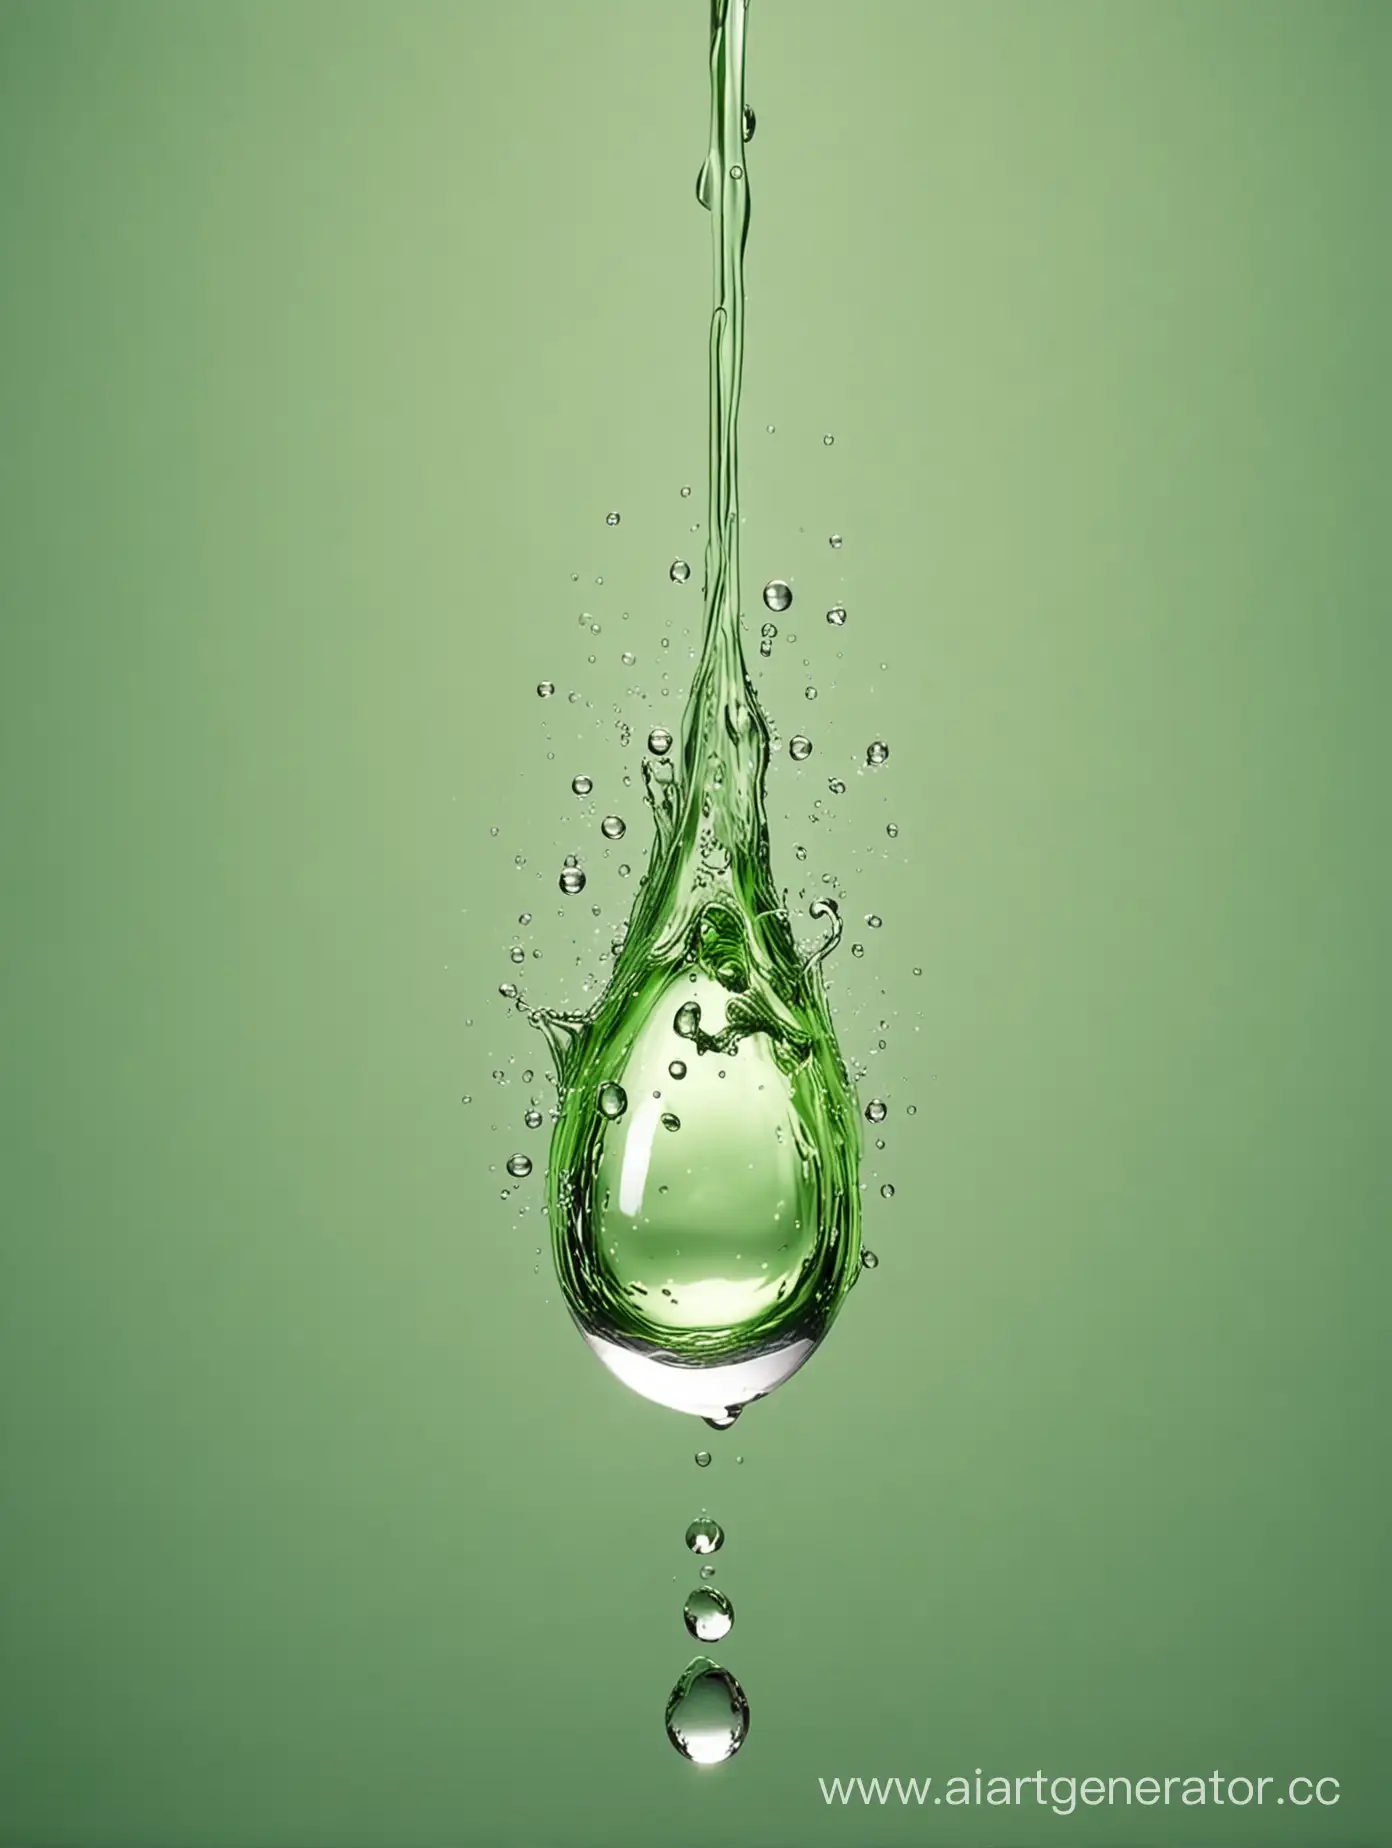 Colorful-Droplets-on-Soft-Green-Surface-Abstract-Artwork